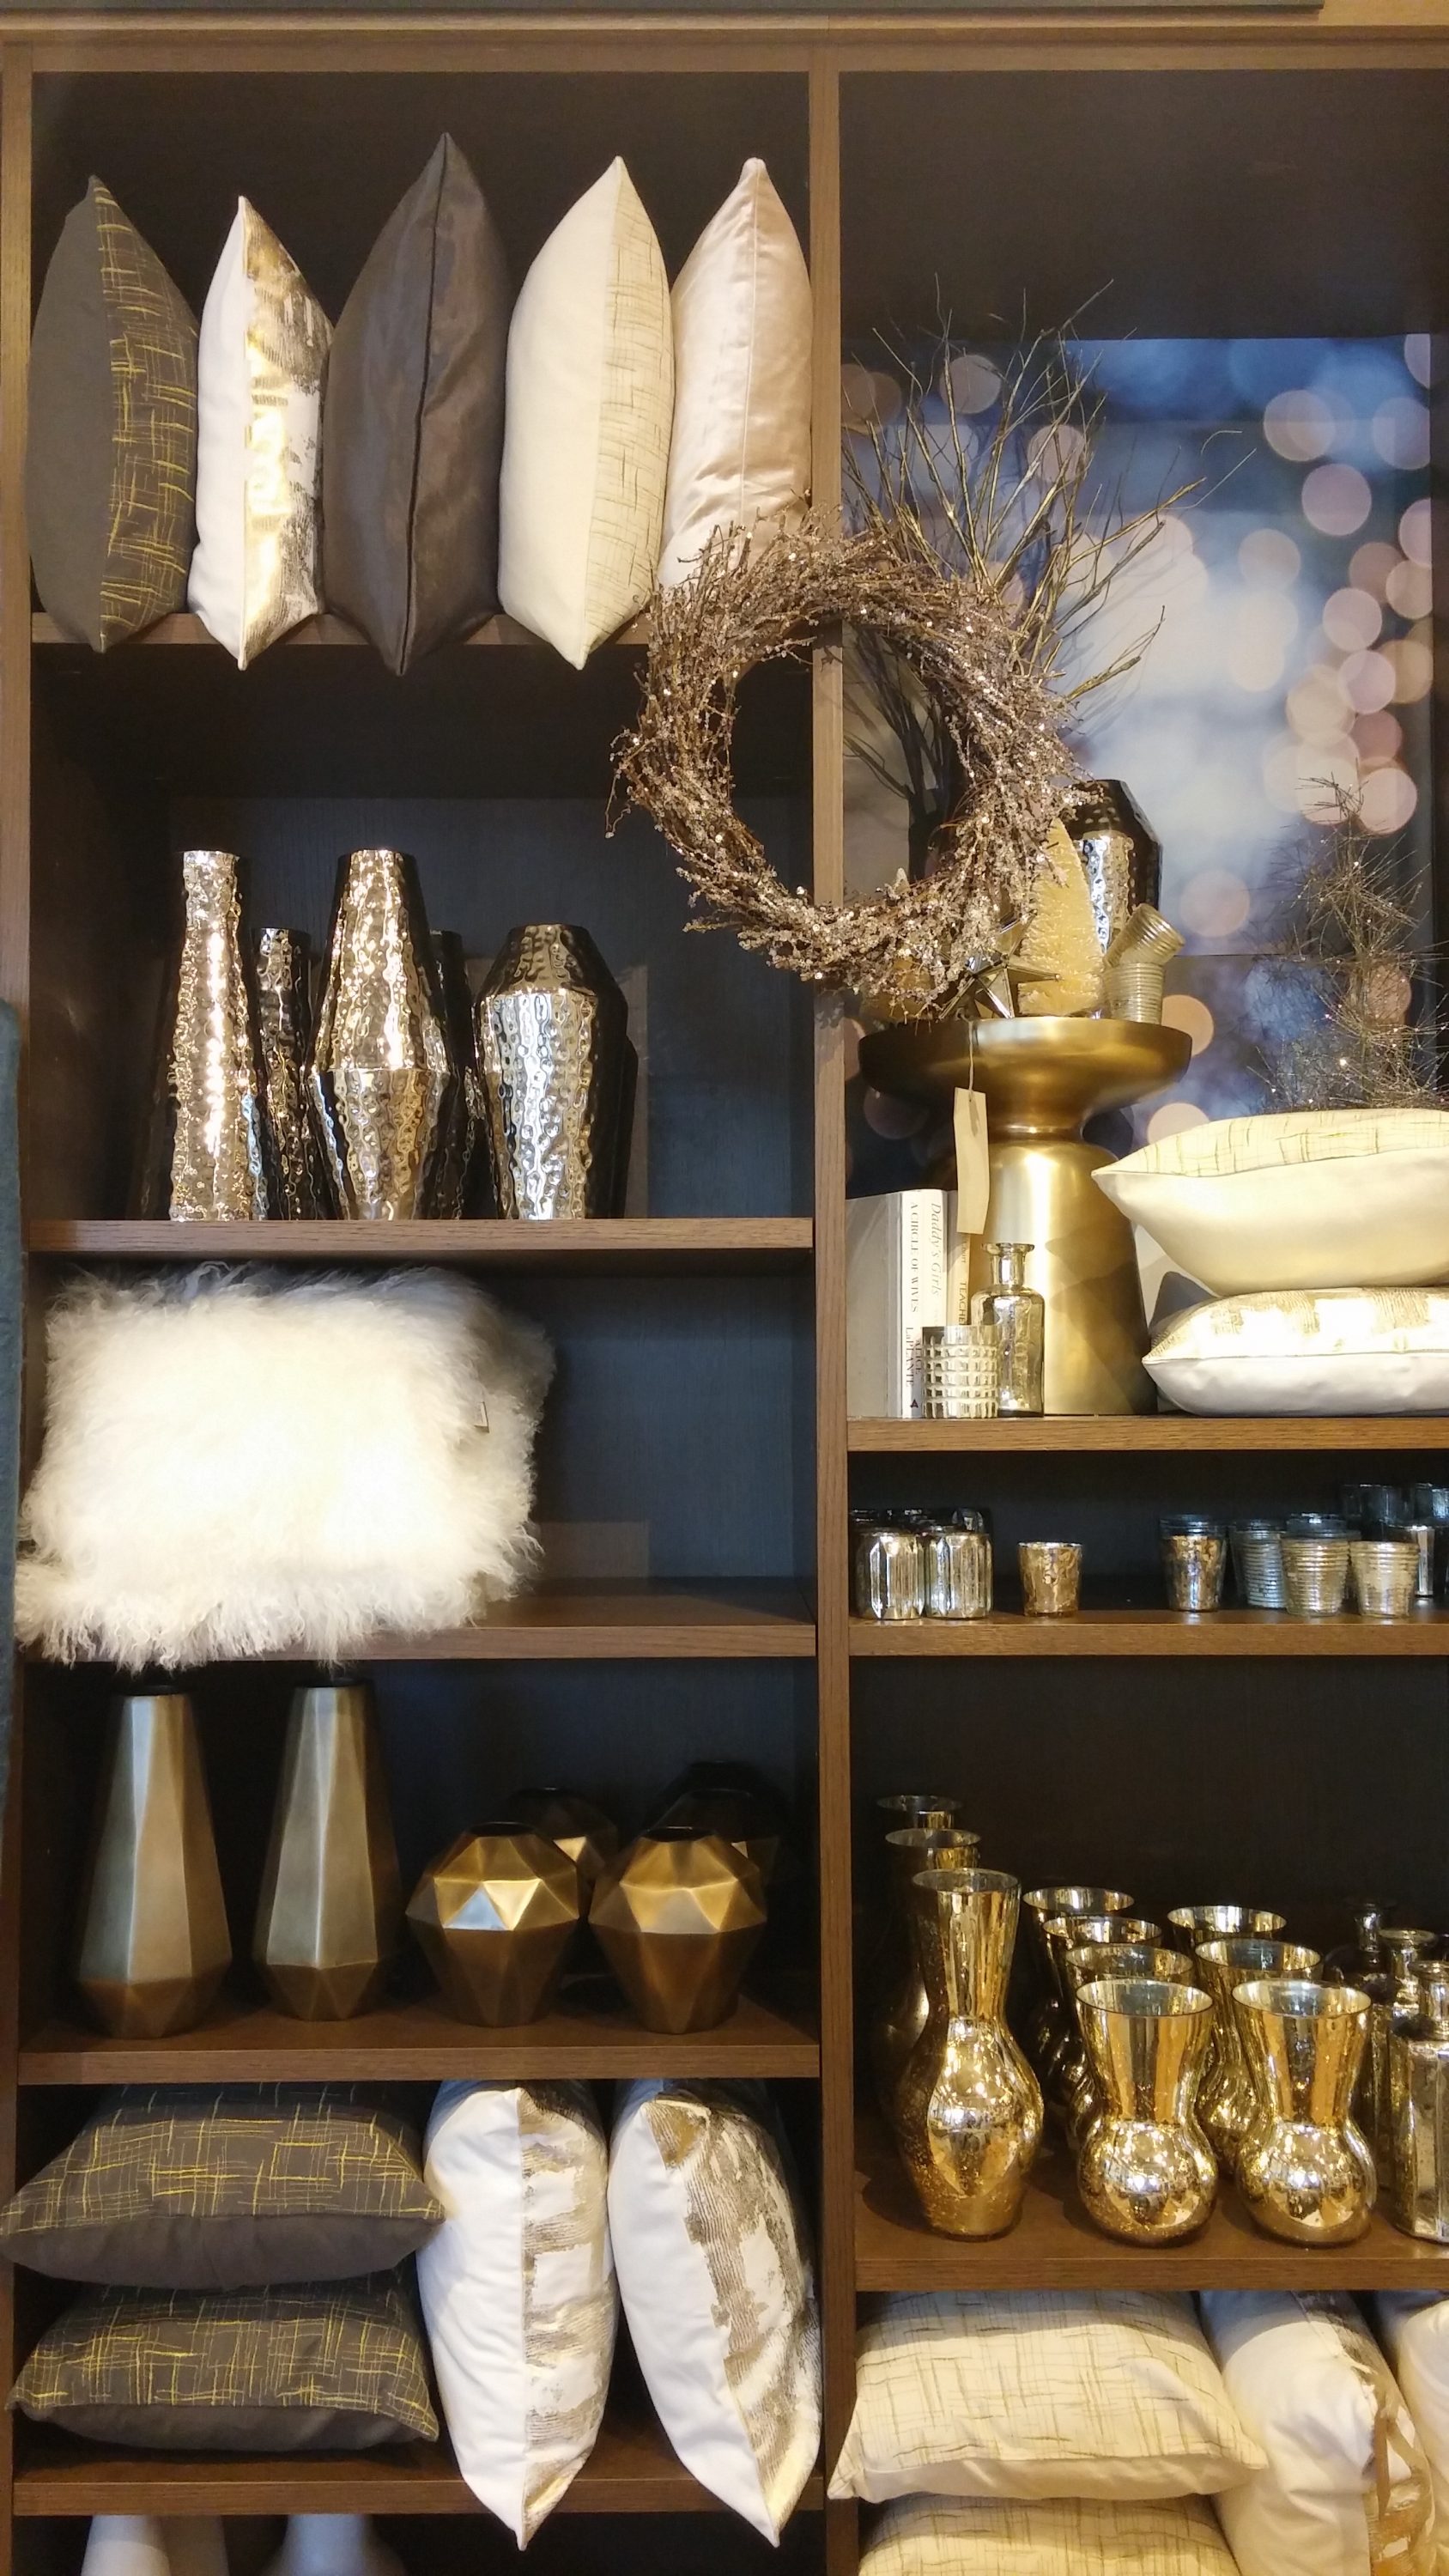 Looking festive in store at west elm